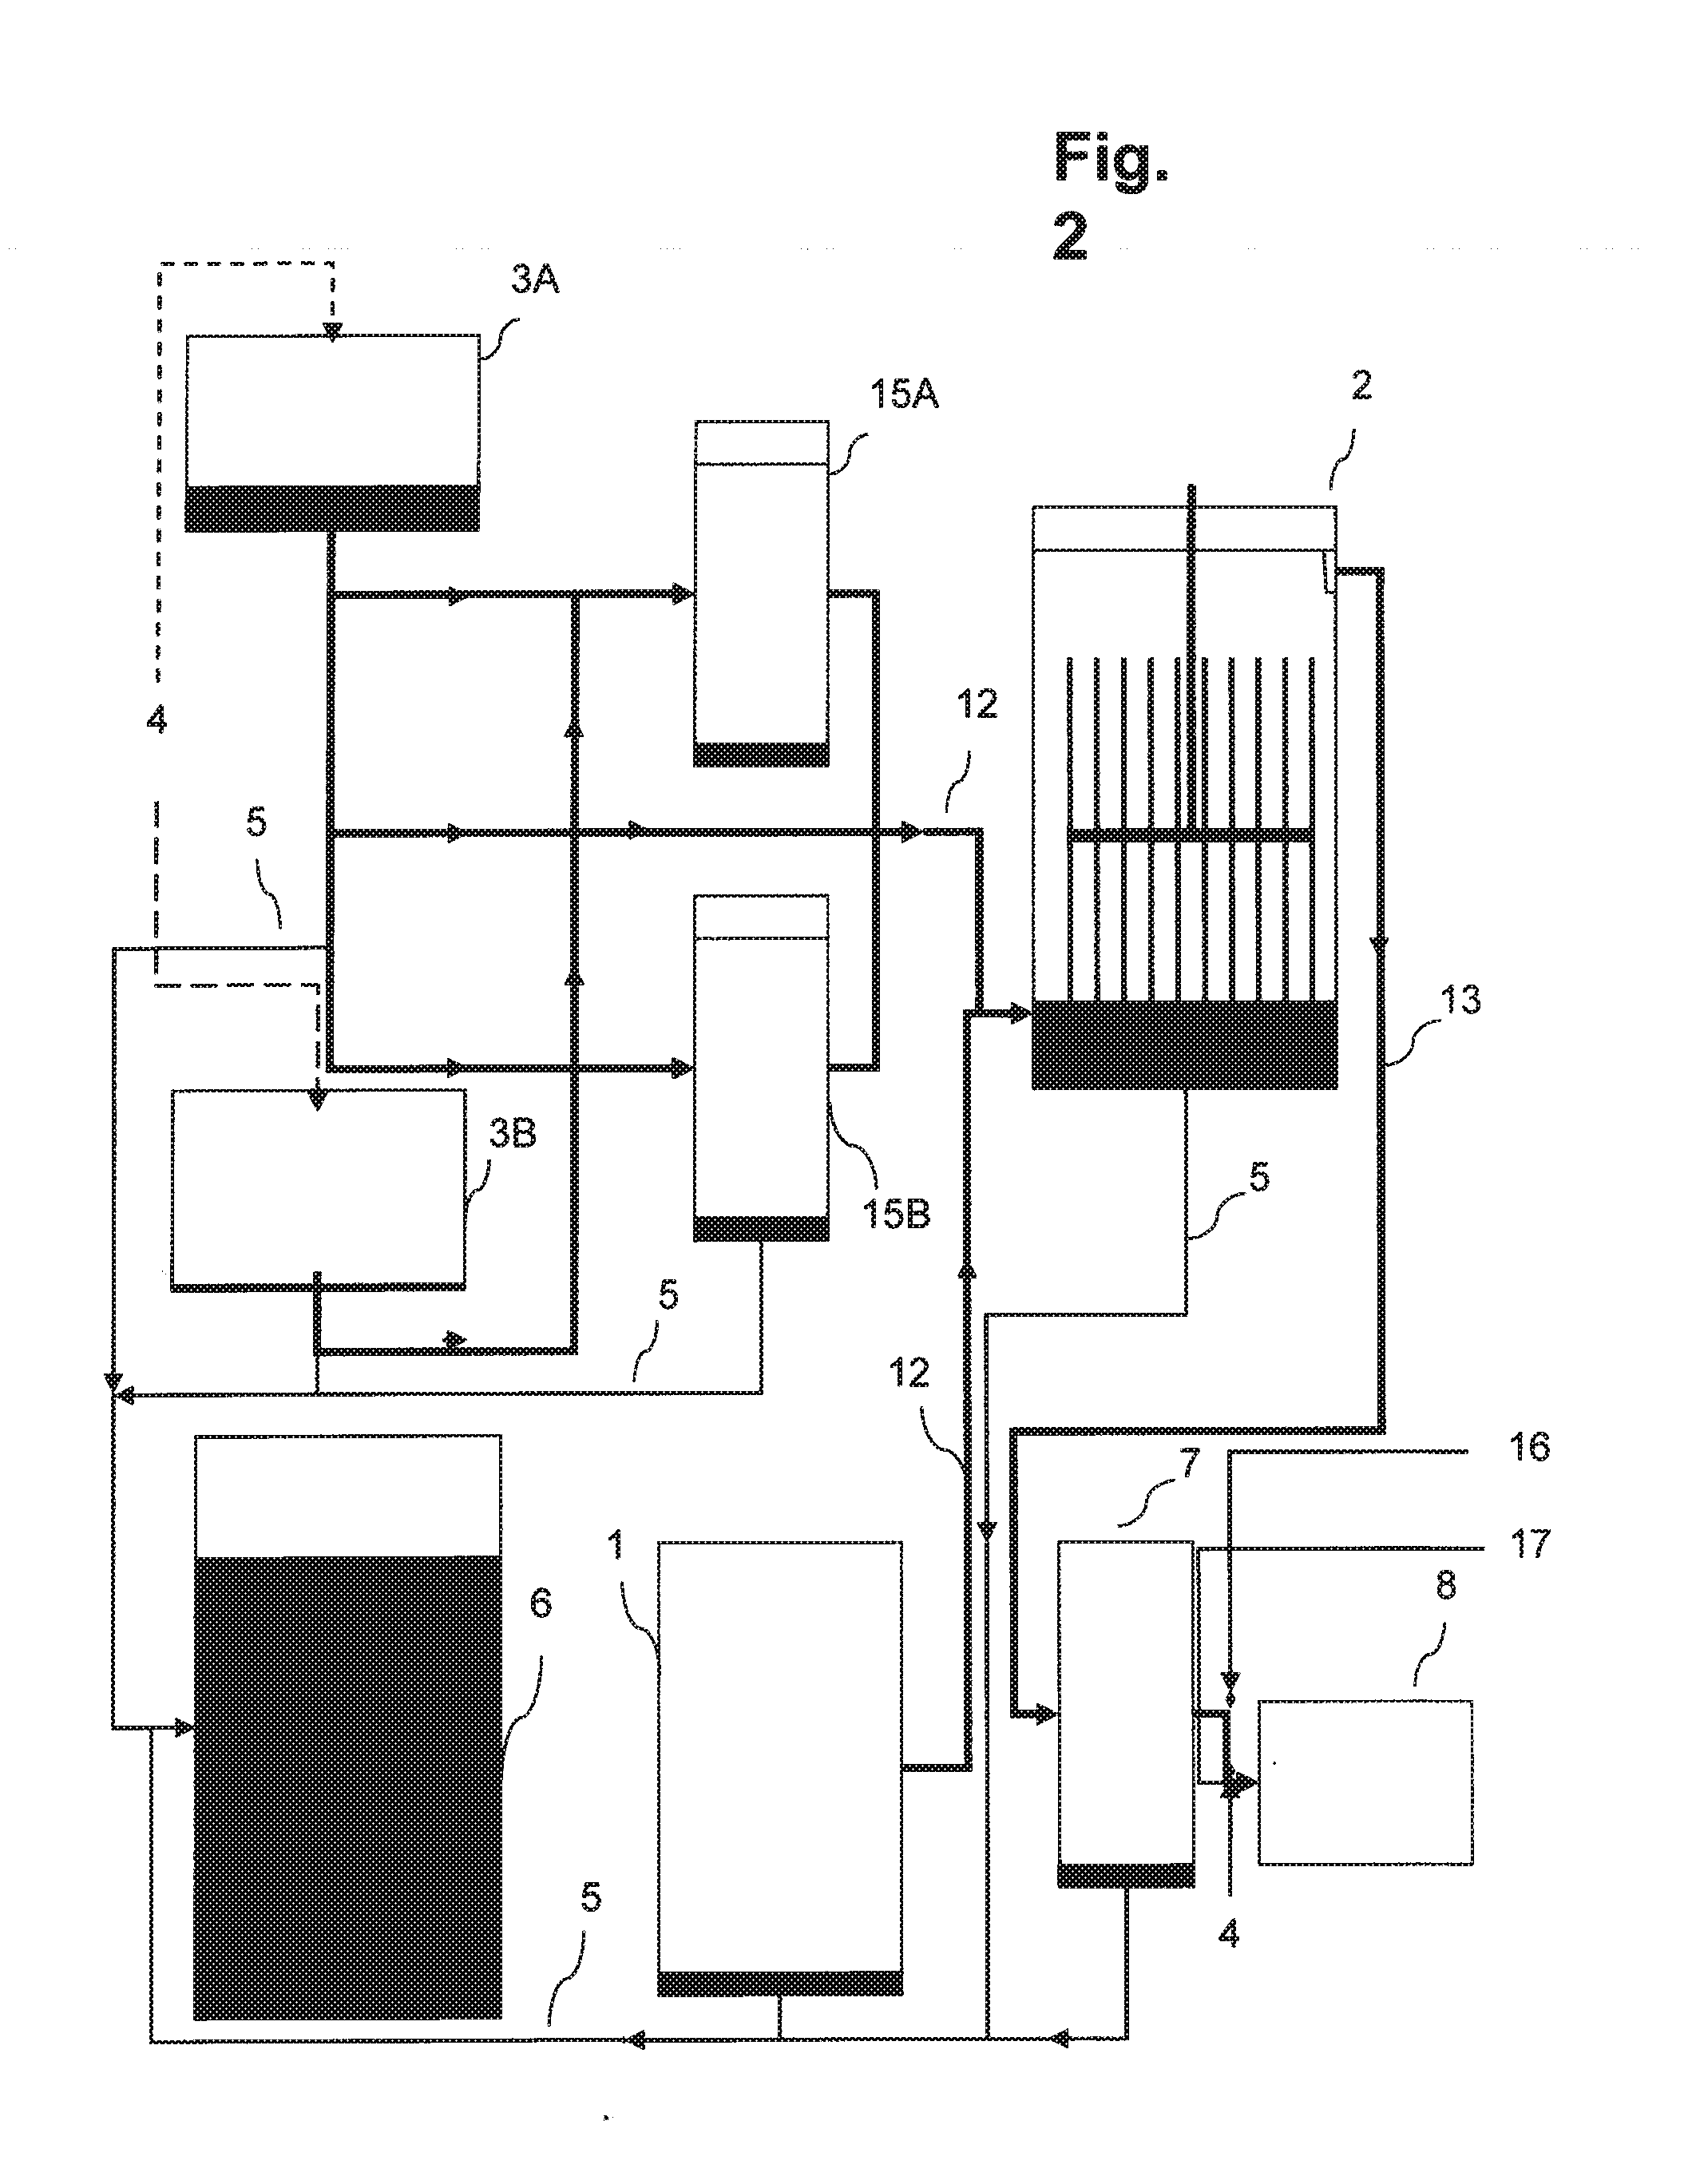 Method for producing crude tall oil by soap washing with calcium carbonate removal